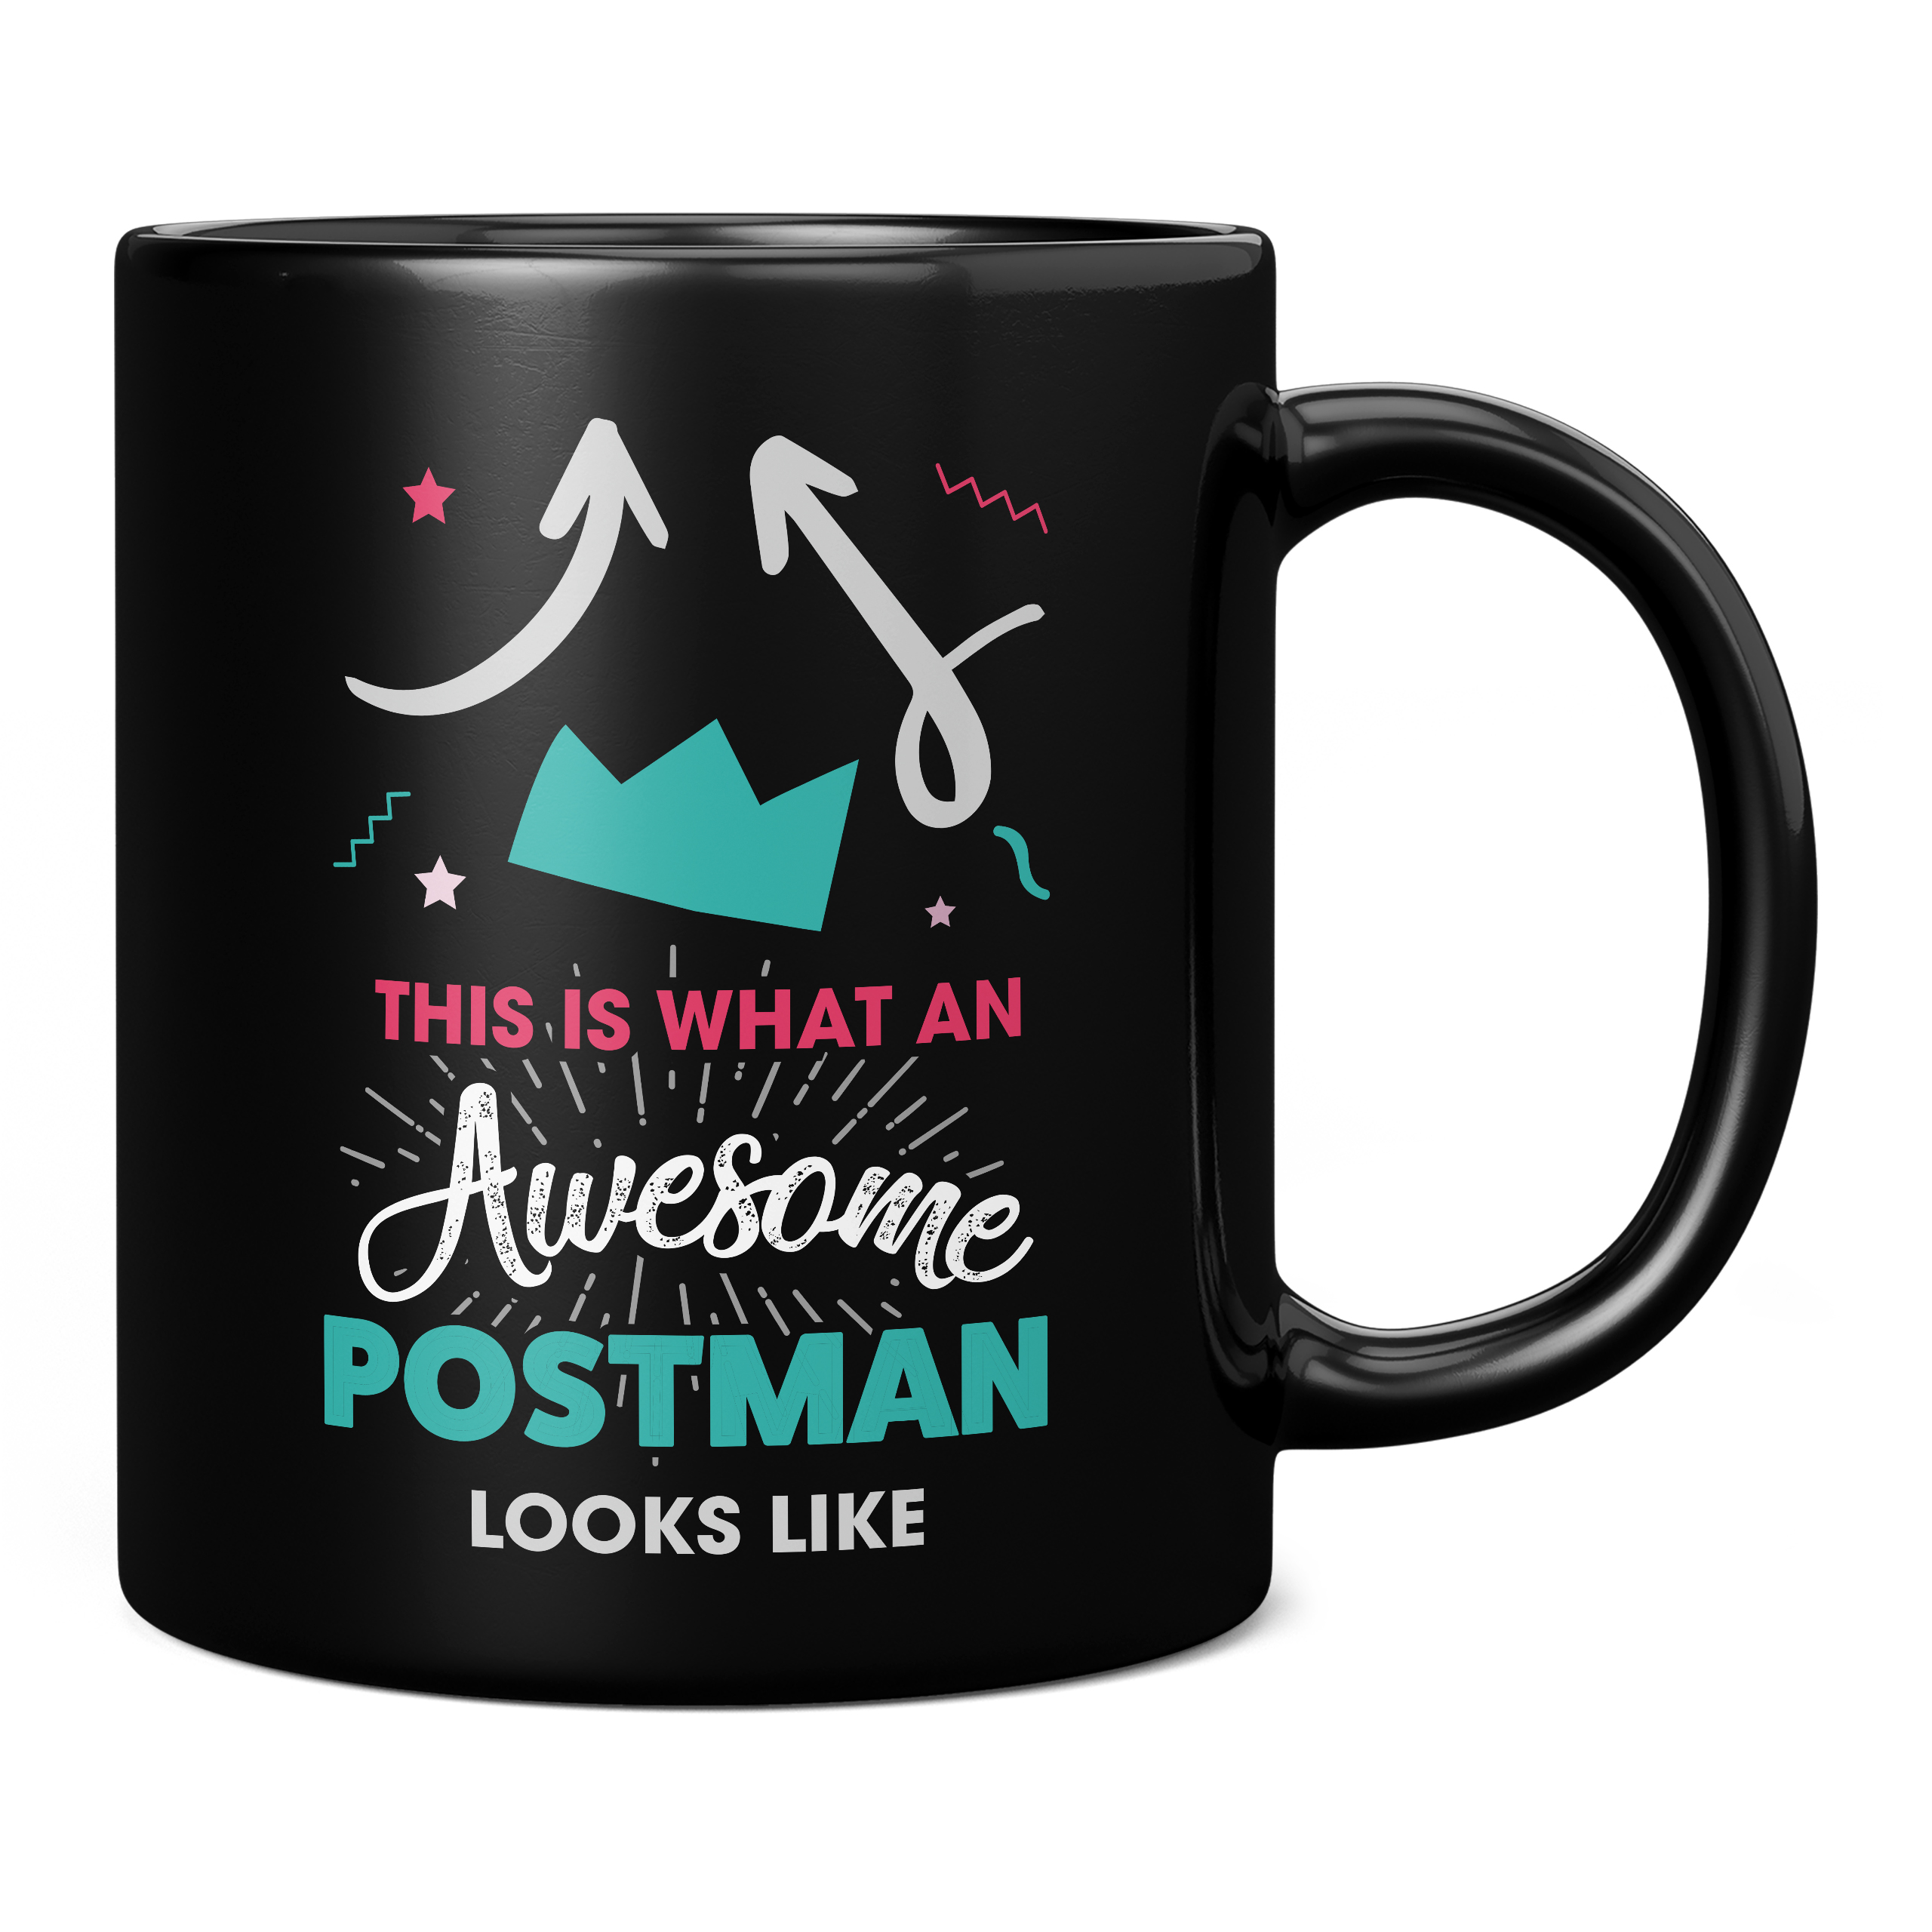 THIS IS WHAT AN AWESOME POSTMAN LOOKS LIKE 11OZ NOVELTY MUG